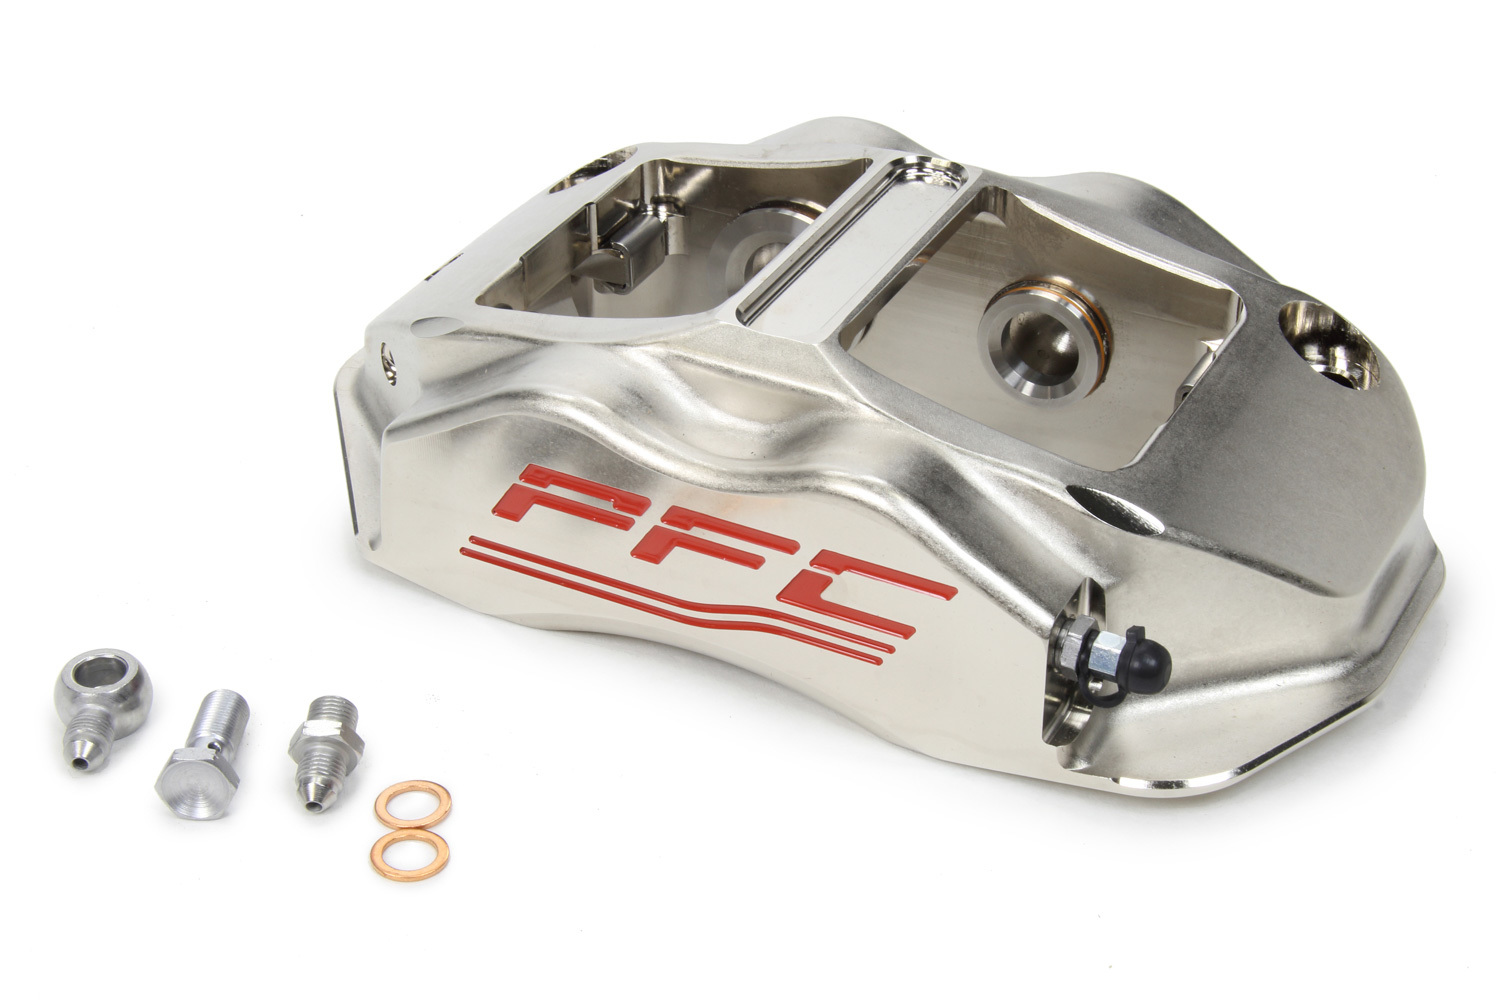 PFC Brakes 94.323.290.365.12 Brake Caliper, ZR94, Passenger Side, Trailing, 4 Piston, Aluminum, Nickel Plated, 12.716 in OD, 1.250 in Thick Rotor, 7.00 in Radial Mount, Each